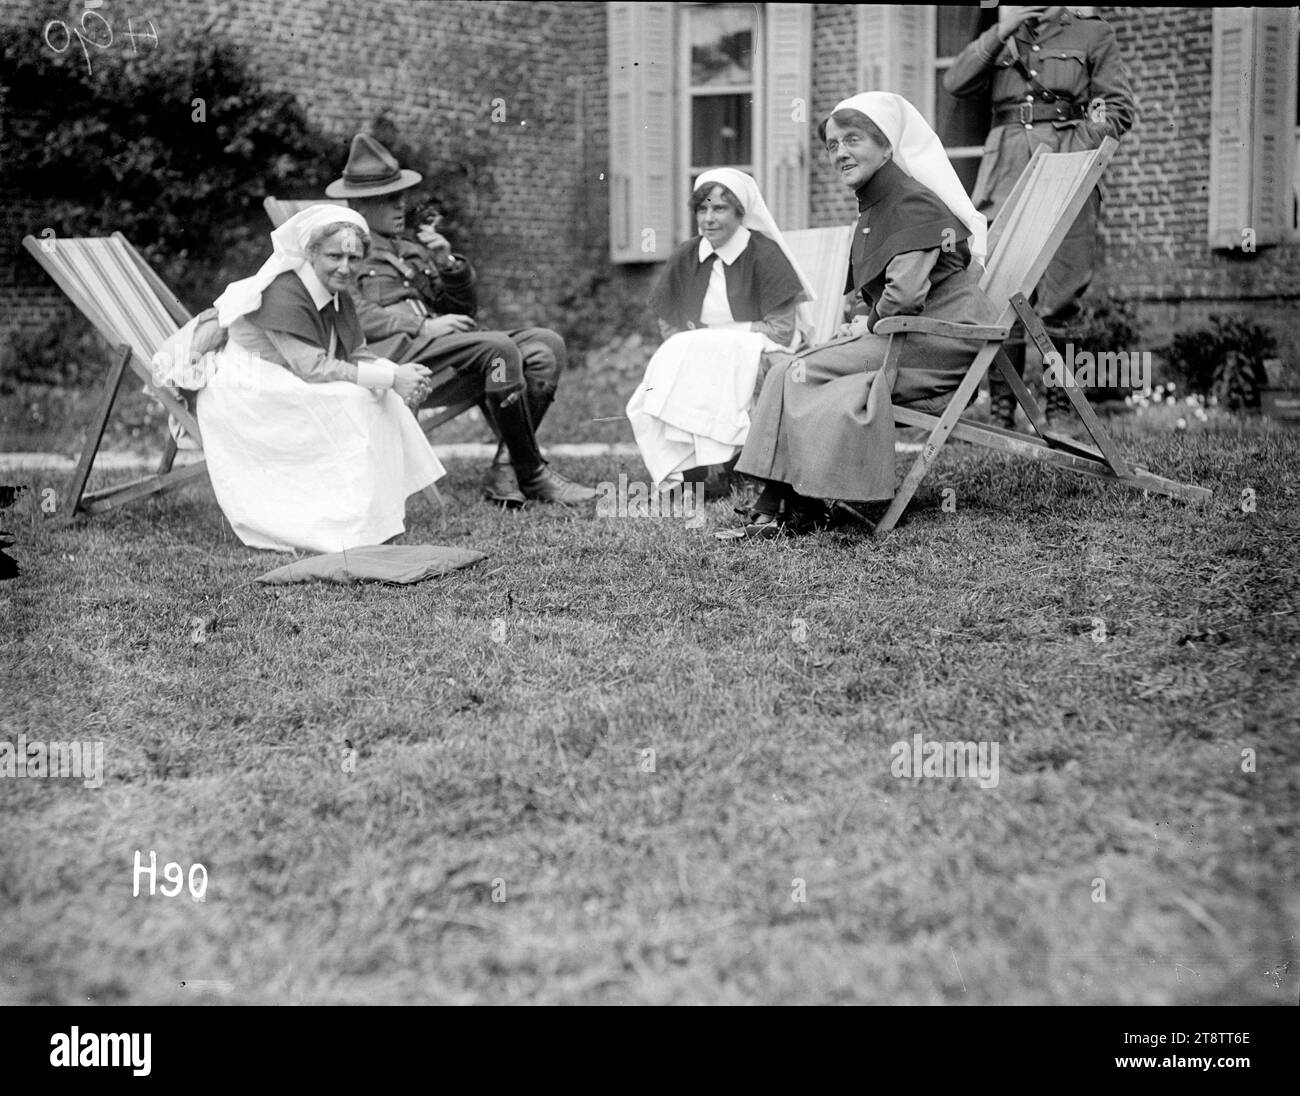 Matron Price at a garden party in the grounds of the New Zealand Stationary Hospital, France, Matron Frances Price, sitting in a deck-chair at right, talks with nurses and a soldier at a garden party in the grounds of the New Zealand Stationary Hospital, probably at Hazebrouck, during World War I. The nurses have been identified as Miss Scott and Sister Whittes. Photograph taken 24 June 1917 Stock Photo